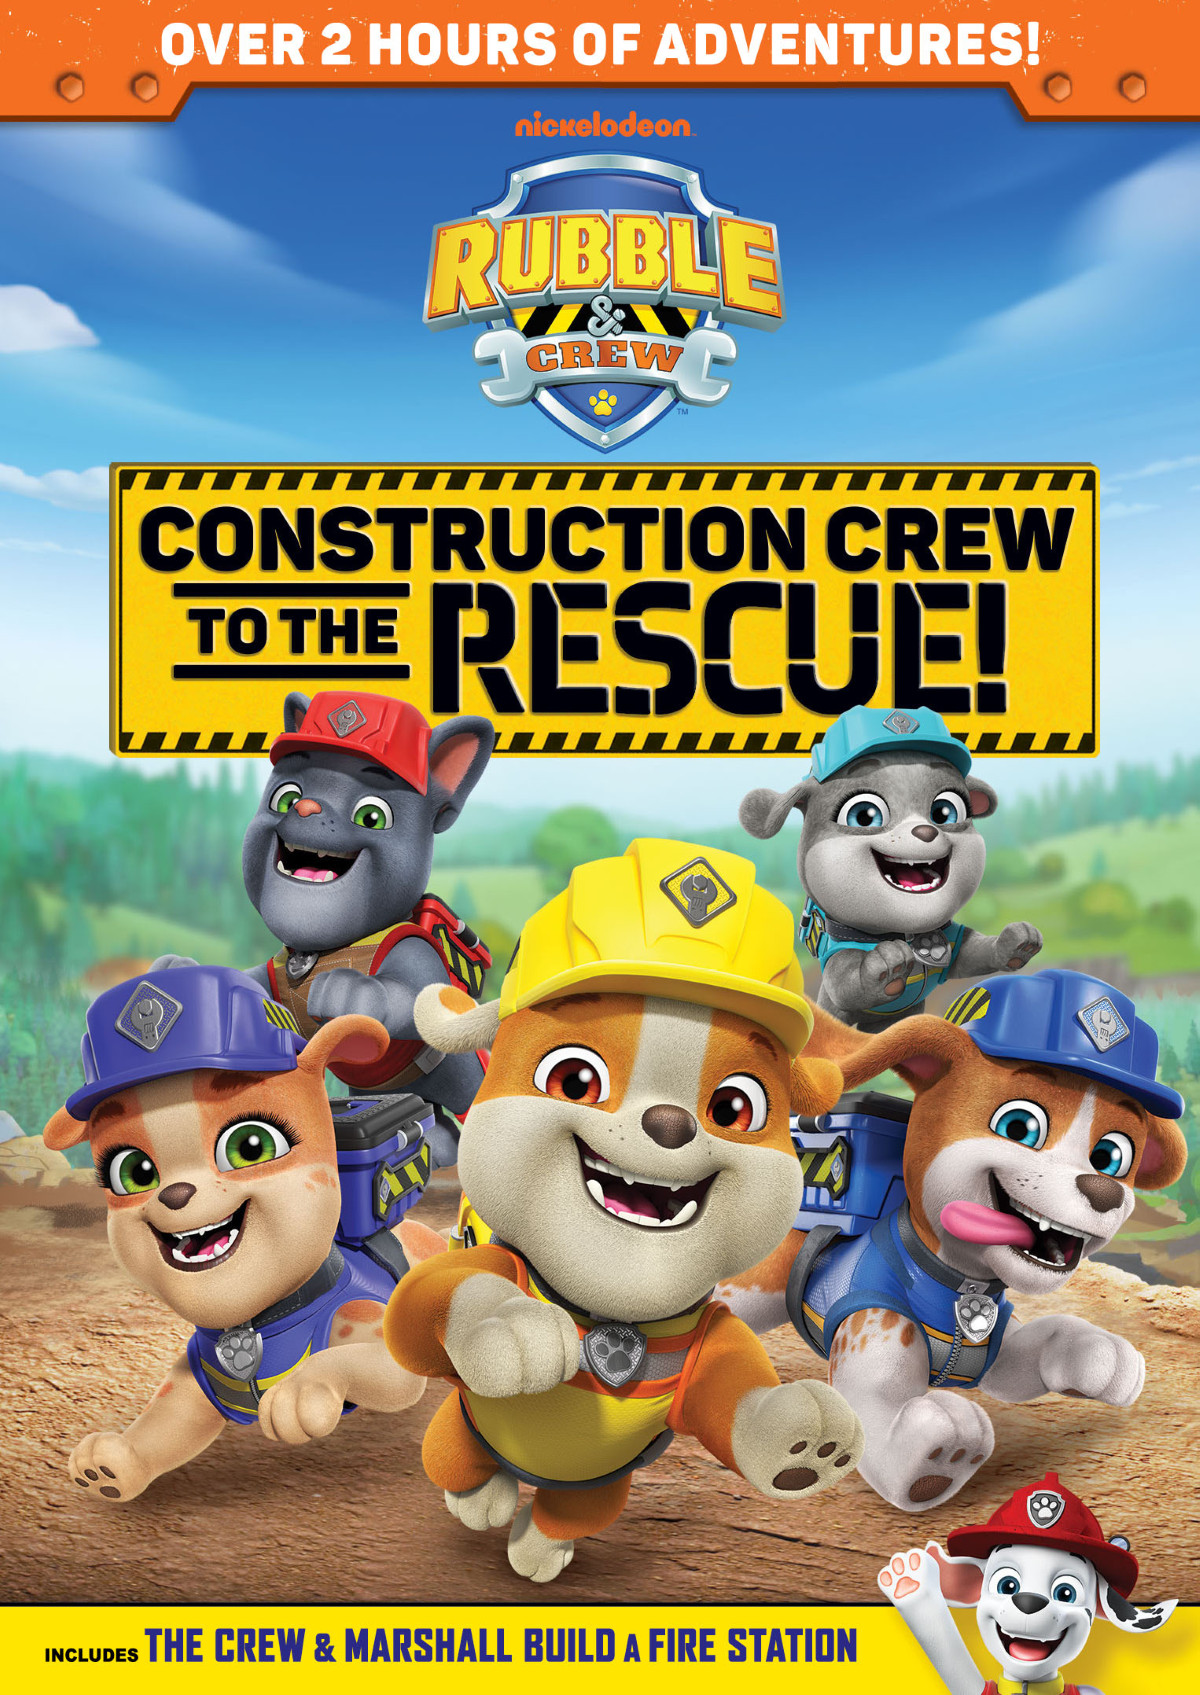 Rubble & Crew Free Printable Activity Sheets: Construction Crew to the Rescue